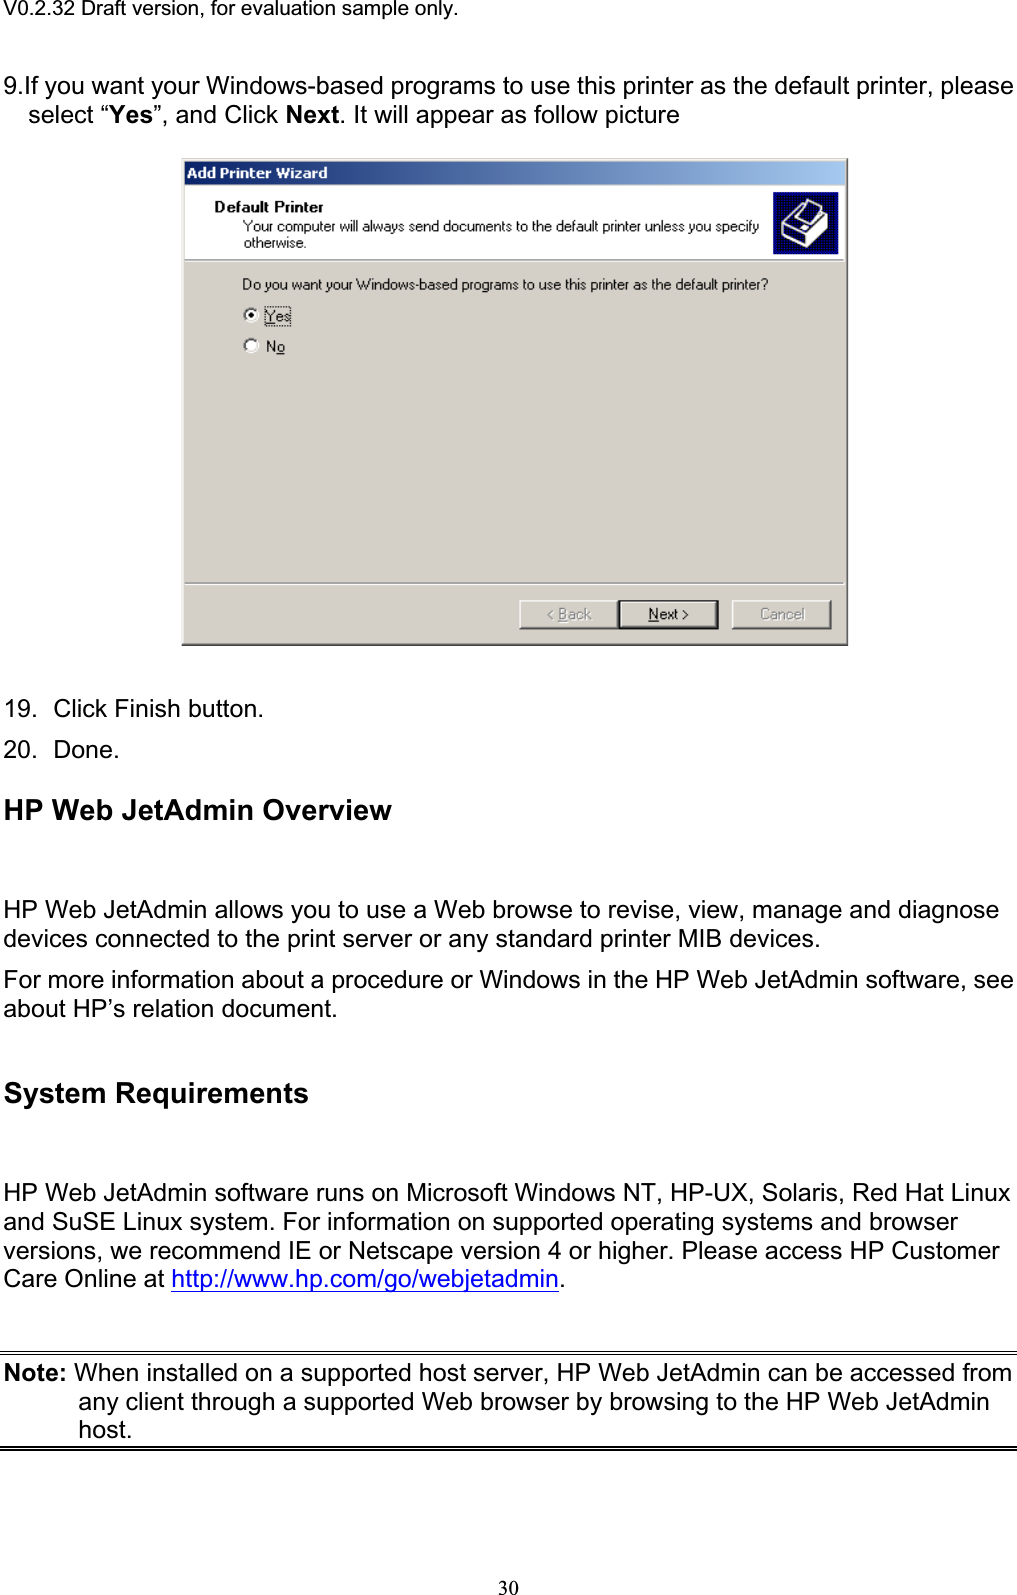 V0.2.32 Draft version, for evaluation sample only.9.If you want your Windows-based programs to use this printer as the default printer, please select “Yes”, and Click Next. It will appear as follow picture 19. Click Finish button. 20. Done. HP Web JetAdmin Overview HP Web JetAdmin allows you to use a Web browse to revise, view, manage and diagnose devices connected to the print server or any standard printer MIB devices. For more information about a procedure or Windows in the HP Web JetAdmin software, see about HP’s relation document. System Requirements HP Web JetAdmin software runs on Microsoft Windows NT, HP-UX, Solaris, Red Hat Linux and SuSE Linux system. For information on supported operating systems and browser versions, we recommend IE or Netscape version 4 or higher. Please access HP Customer Care Online at http://www.hp.com/go/webjetadmin.Note: When installed on a supported host server, HP Web JetAdmin can be accessed from any client through a supported Web browser by browsing to the HP Web JetAdmin host.30